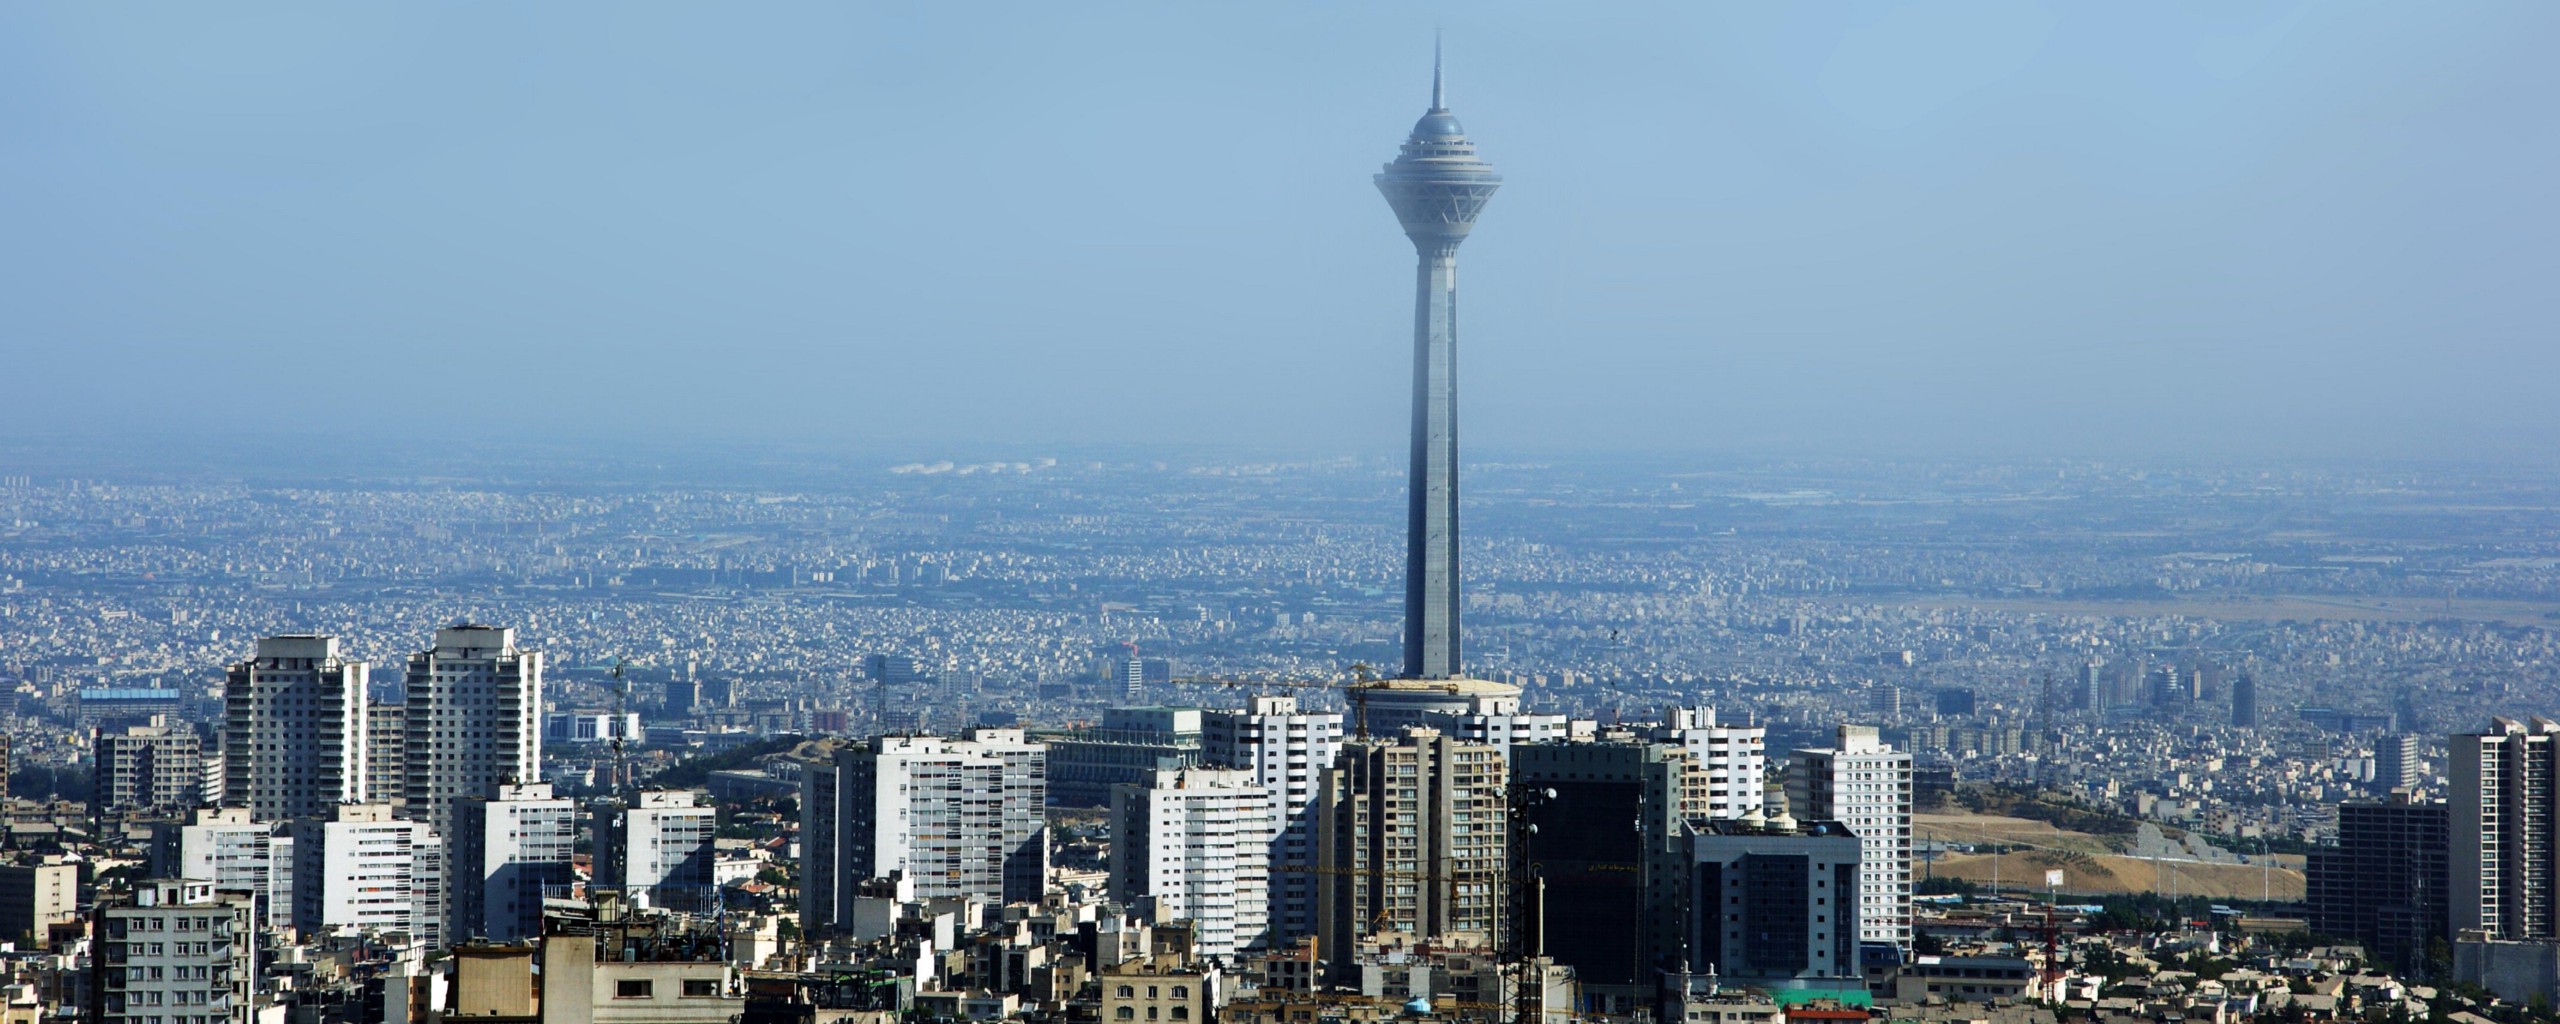 A view of Tehran's city center.